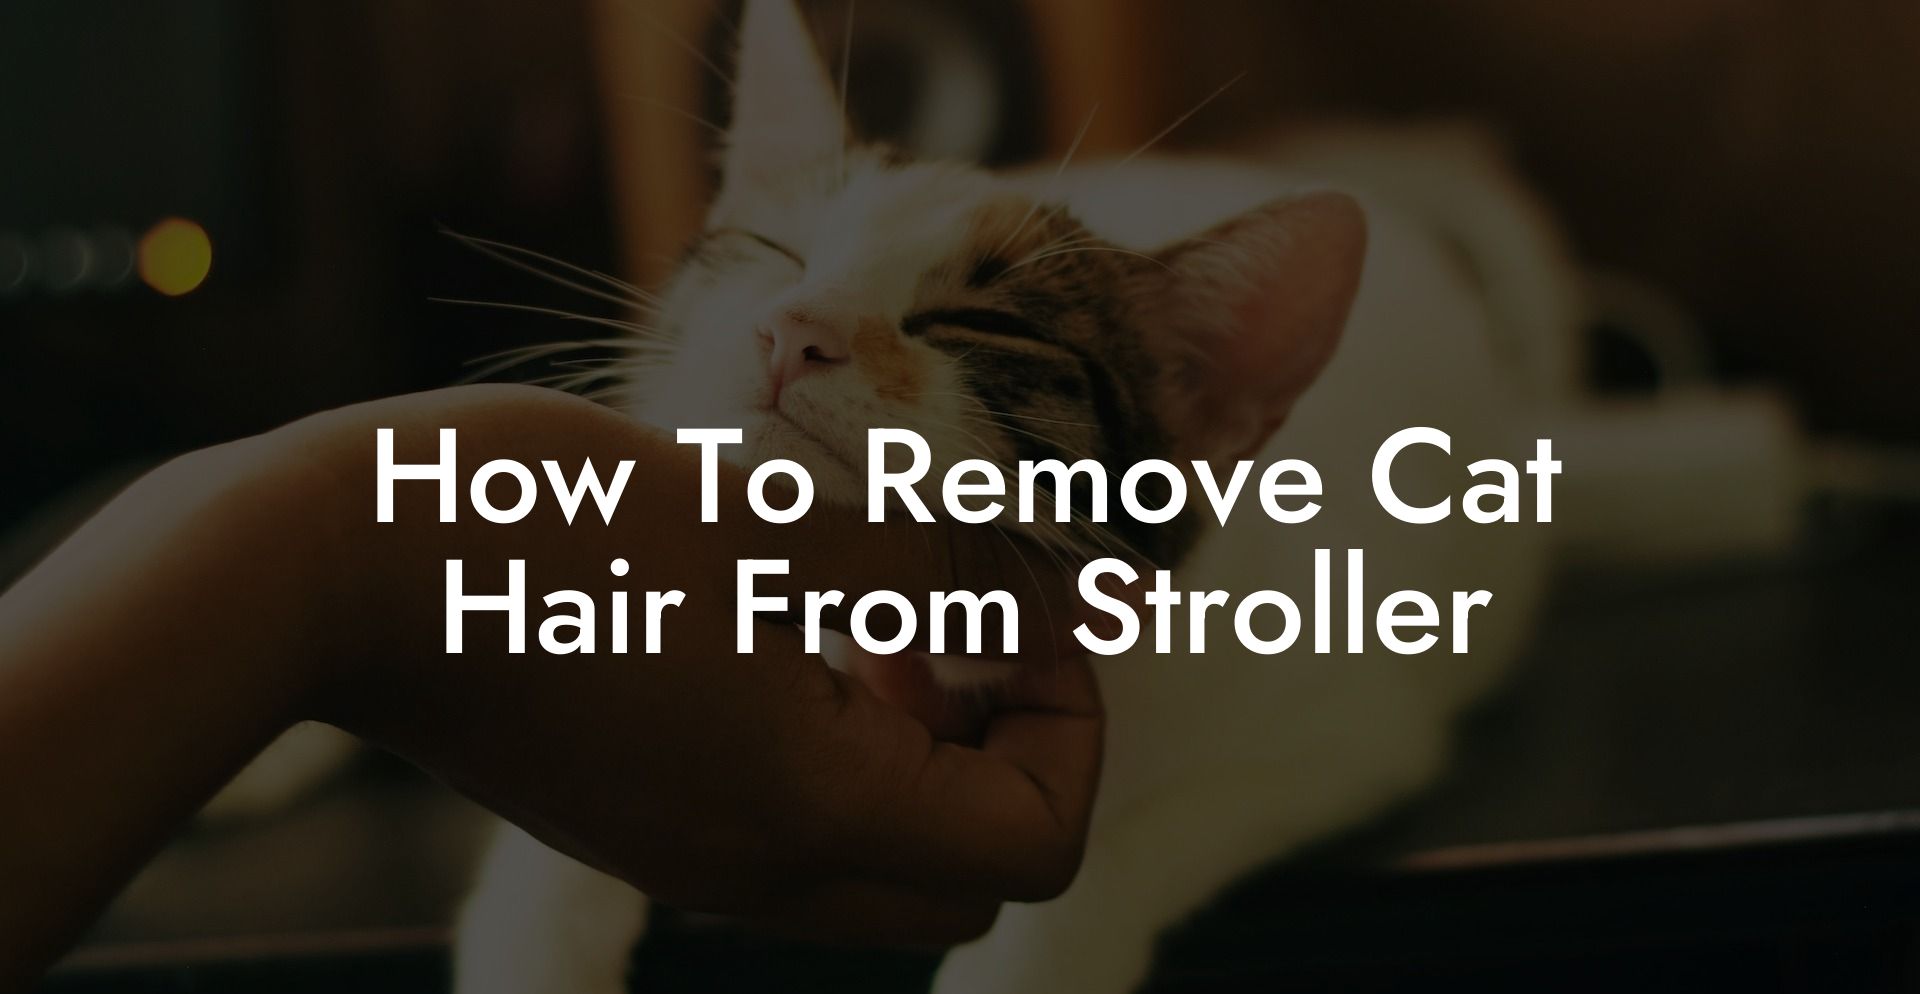 How To Remove Cat Hair From Stroller